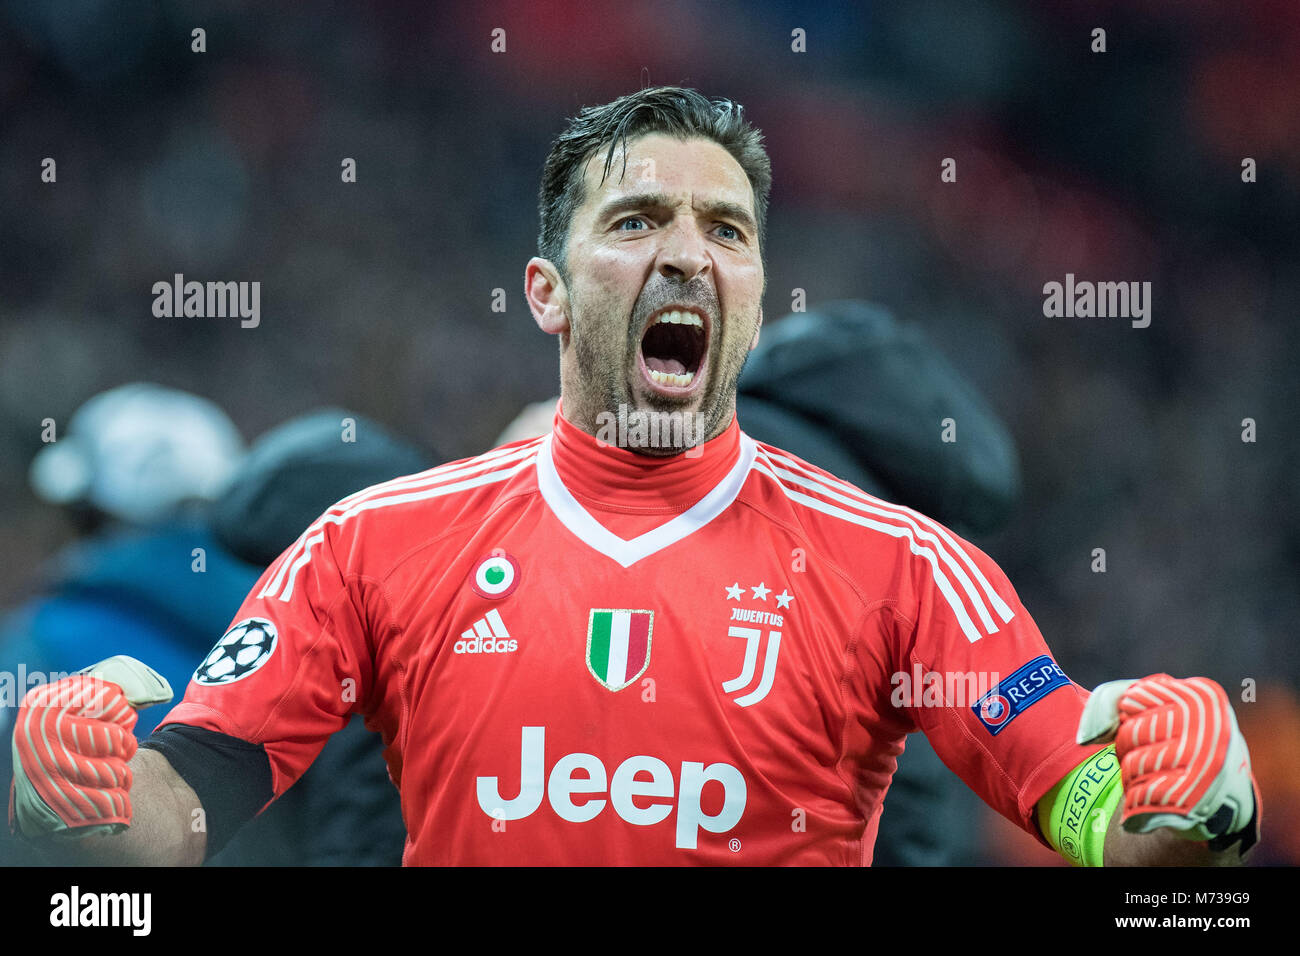 LONDON, ENGLAND - MARCH 07: Gianluigi Buffon (1) of Juventus celebrate after the final whistle during the UEFA Champions League Round of 16 Second Leg match between Tottenham Hotspur and Juventus at Wembley Stadium on March 7, 2018 in London, United Kingdom. (Photo by MB Media/  ) Stock Photo